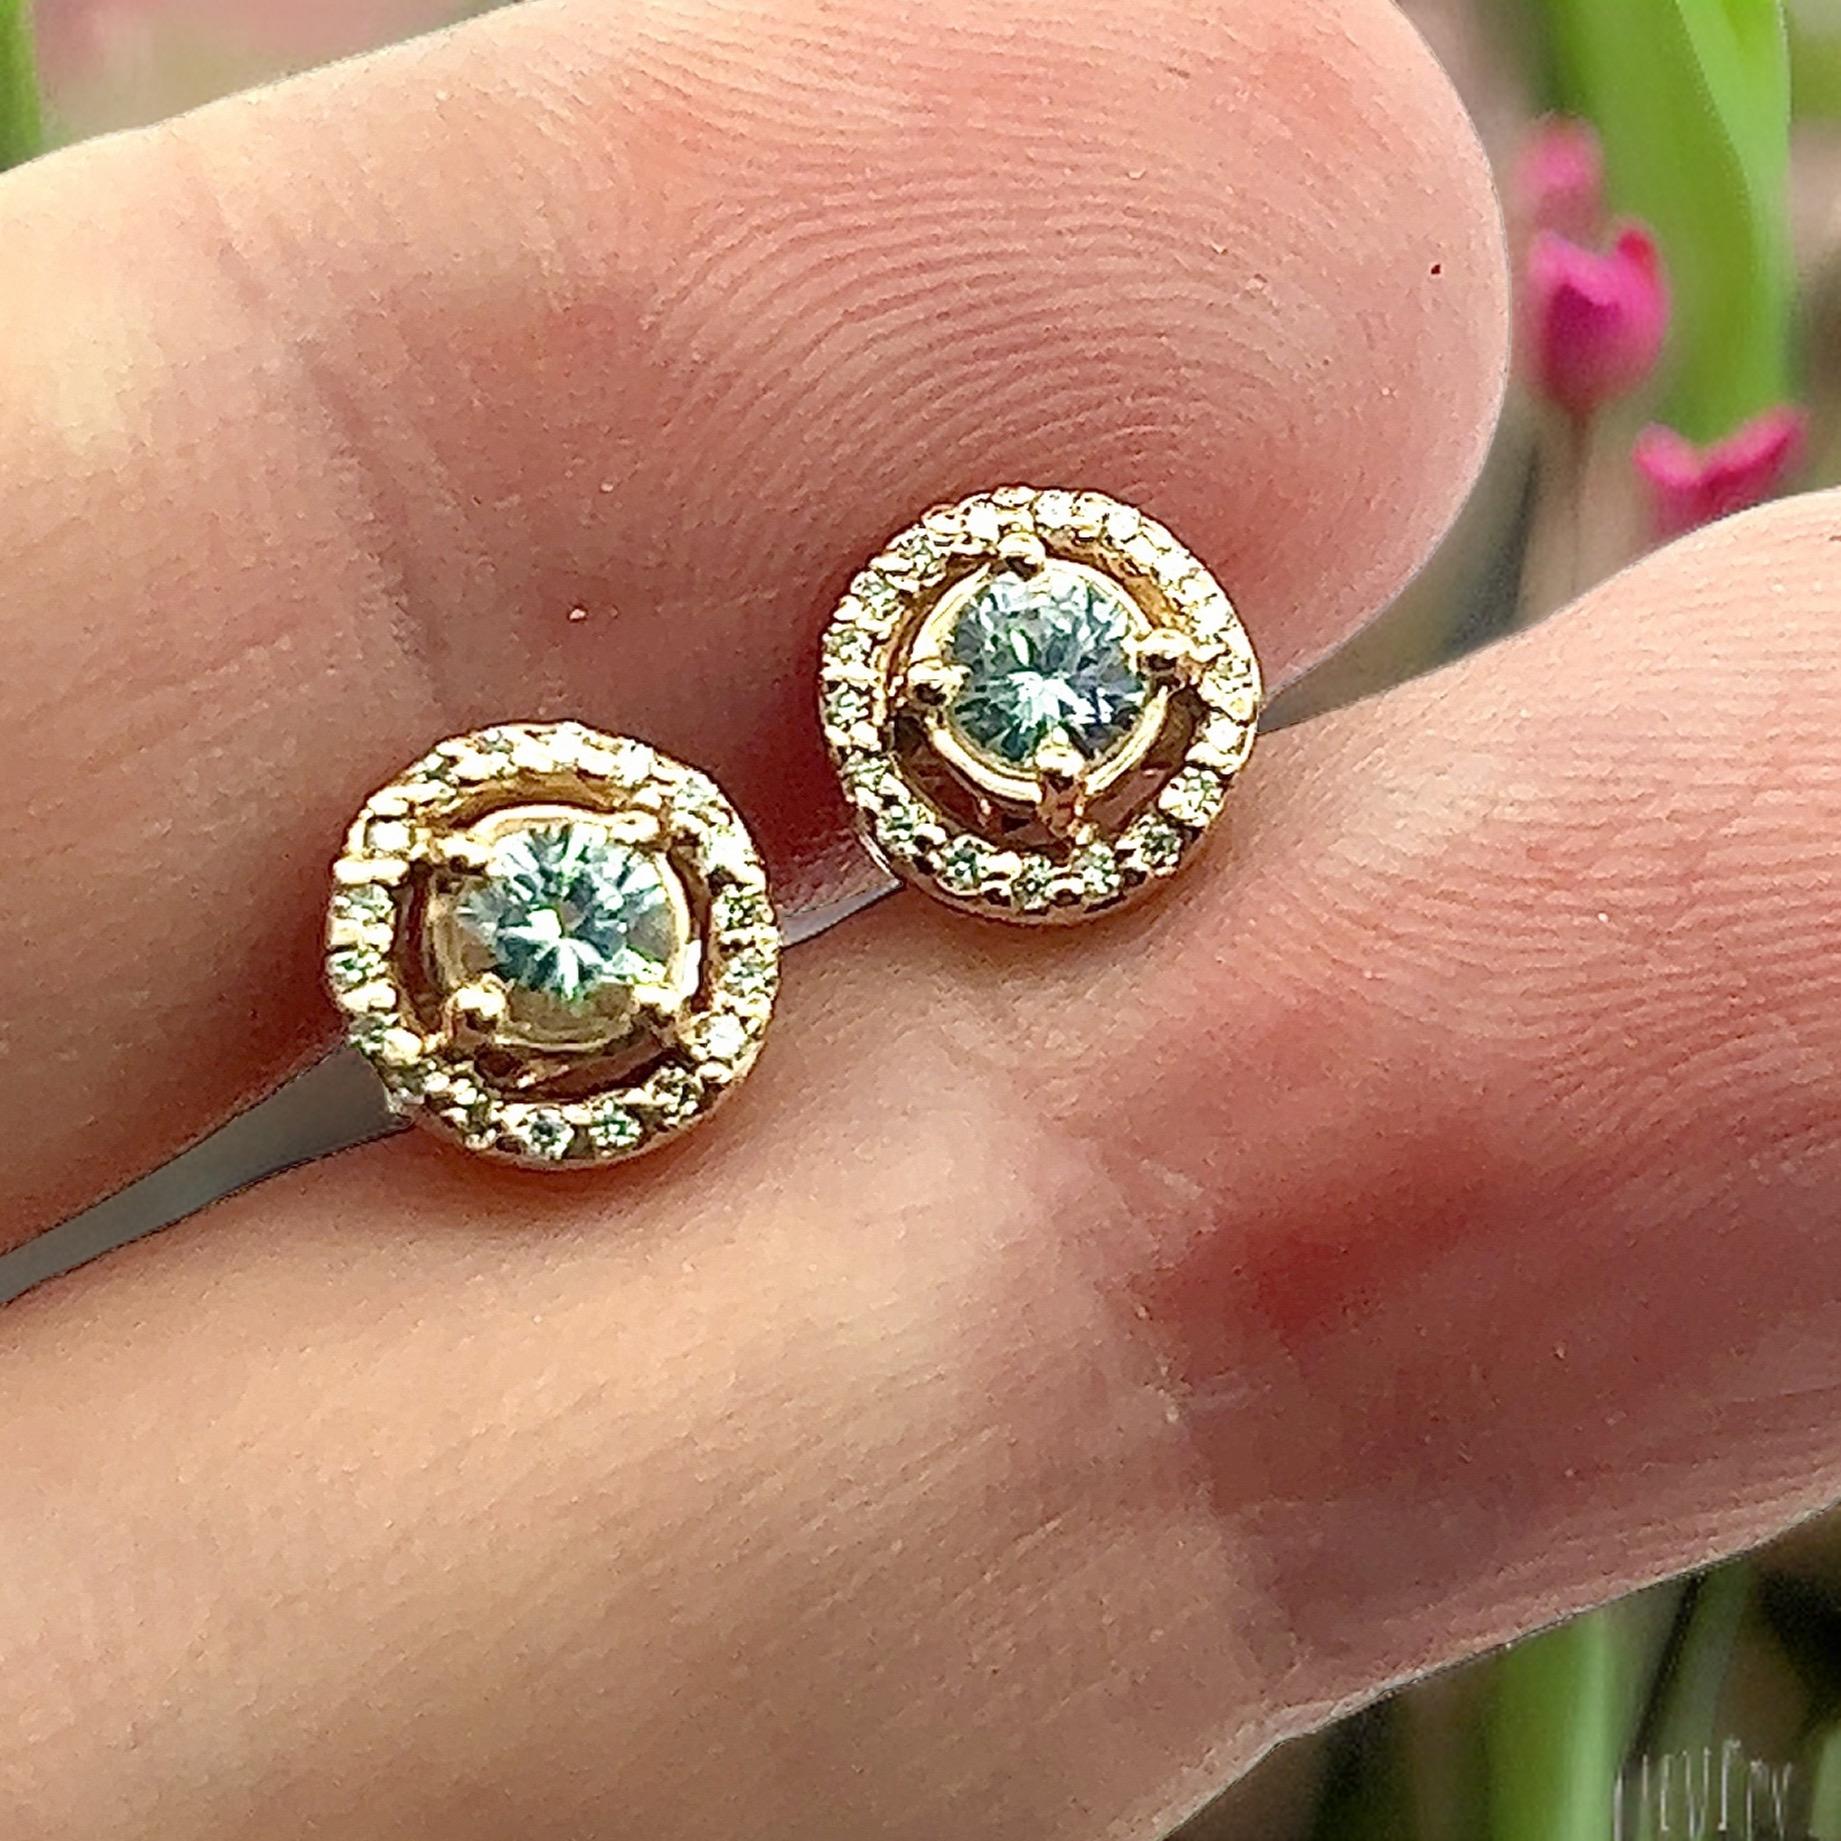 Round Cut Natural White Sapphire Diamond Stud Earrings 14k Yellow Gold 0.97 TCW Certified For Sale